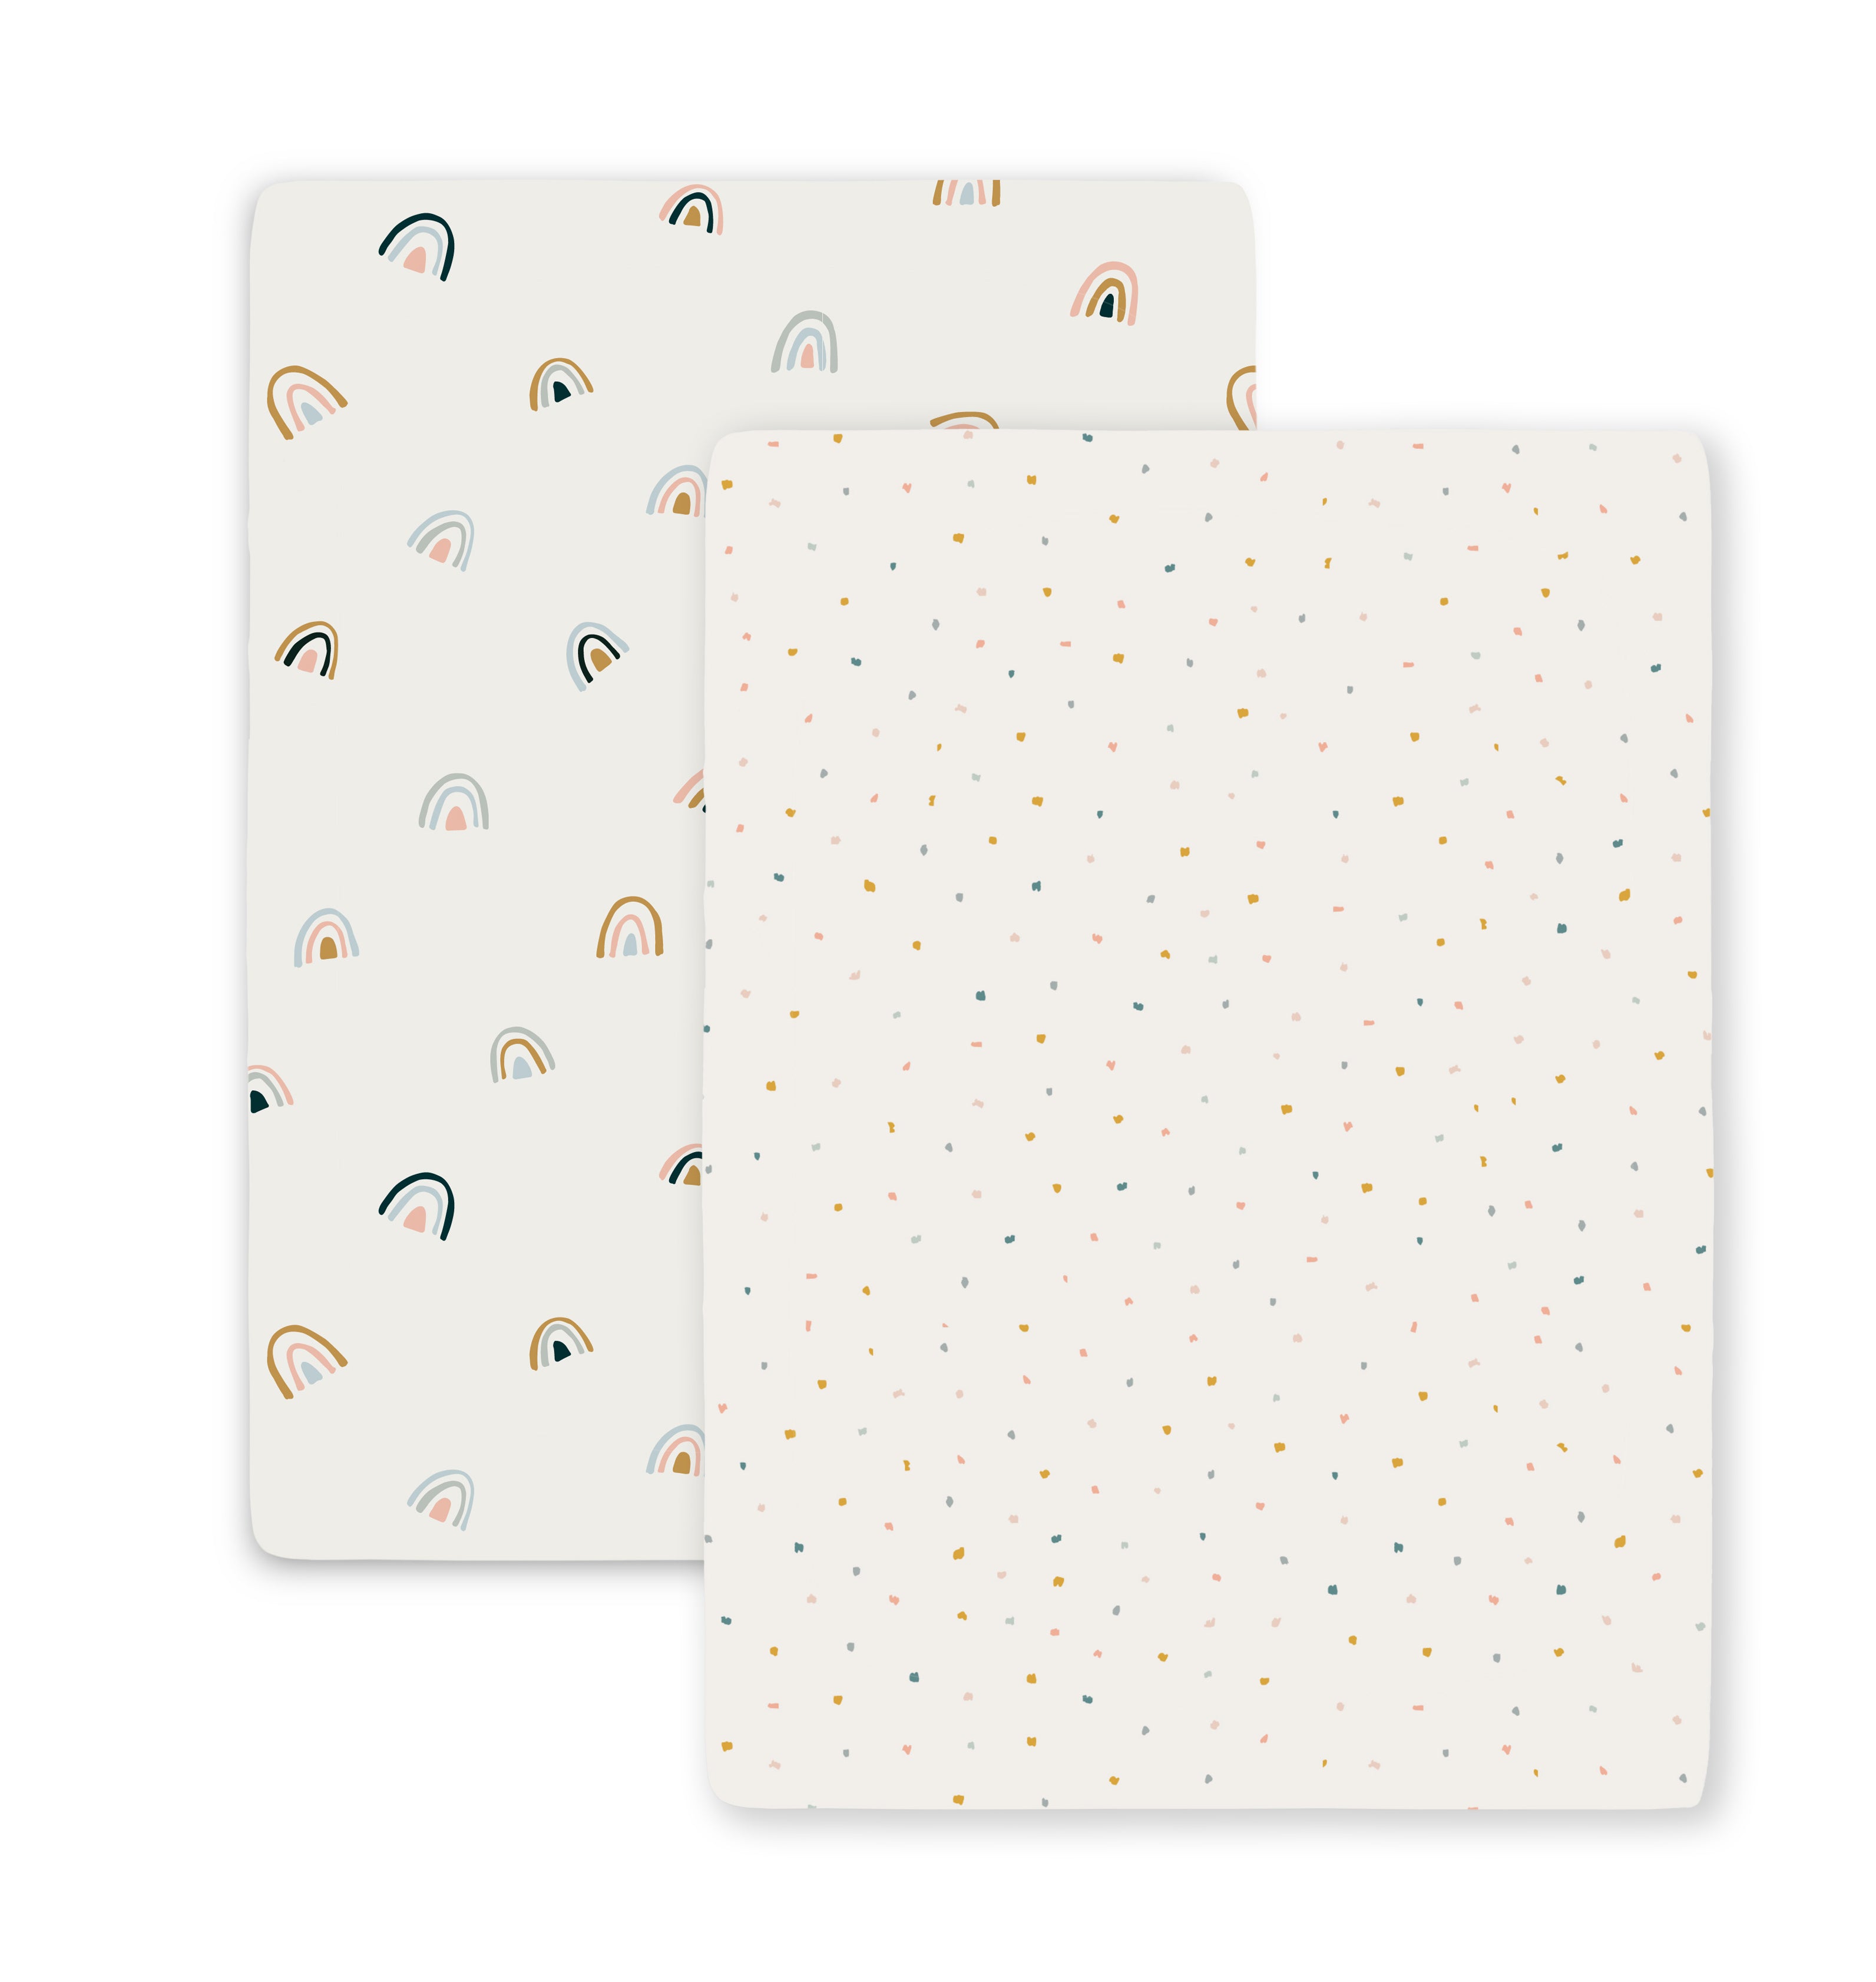 Two stackable Mini Crib Fitted Sheet Sets with different designs; one featuring small pastel rainbows on a white background and the other with polka dots in pastel colors on white from Makemake Organics.